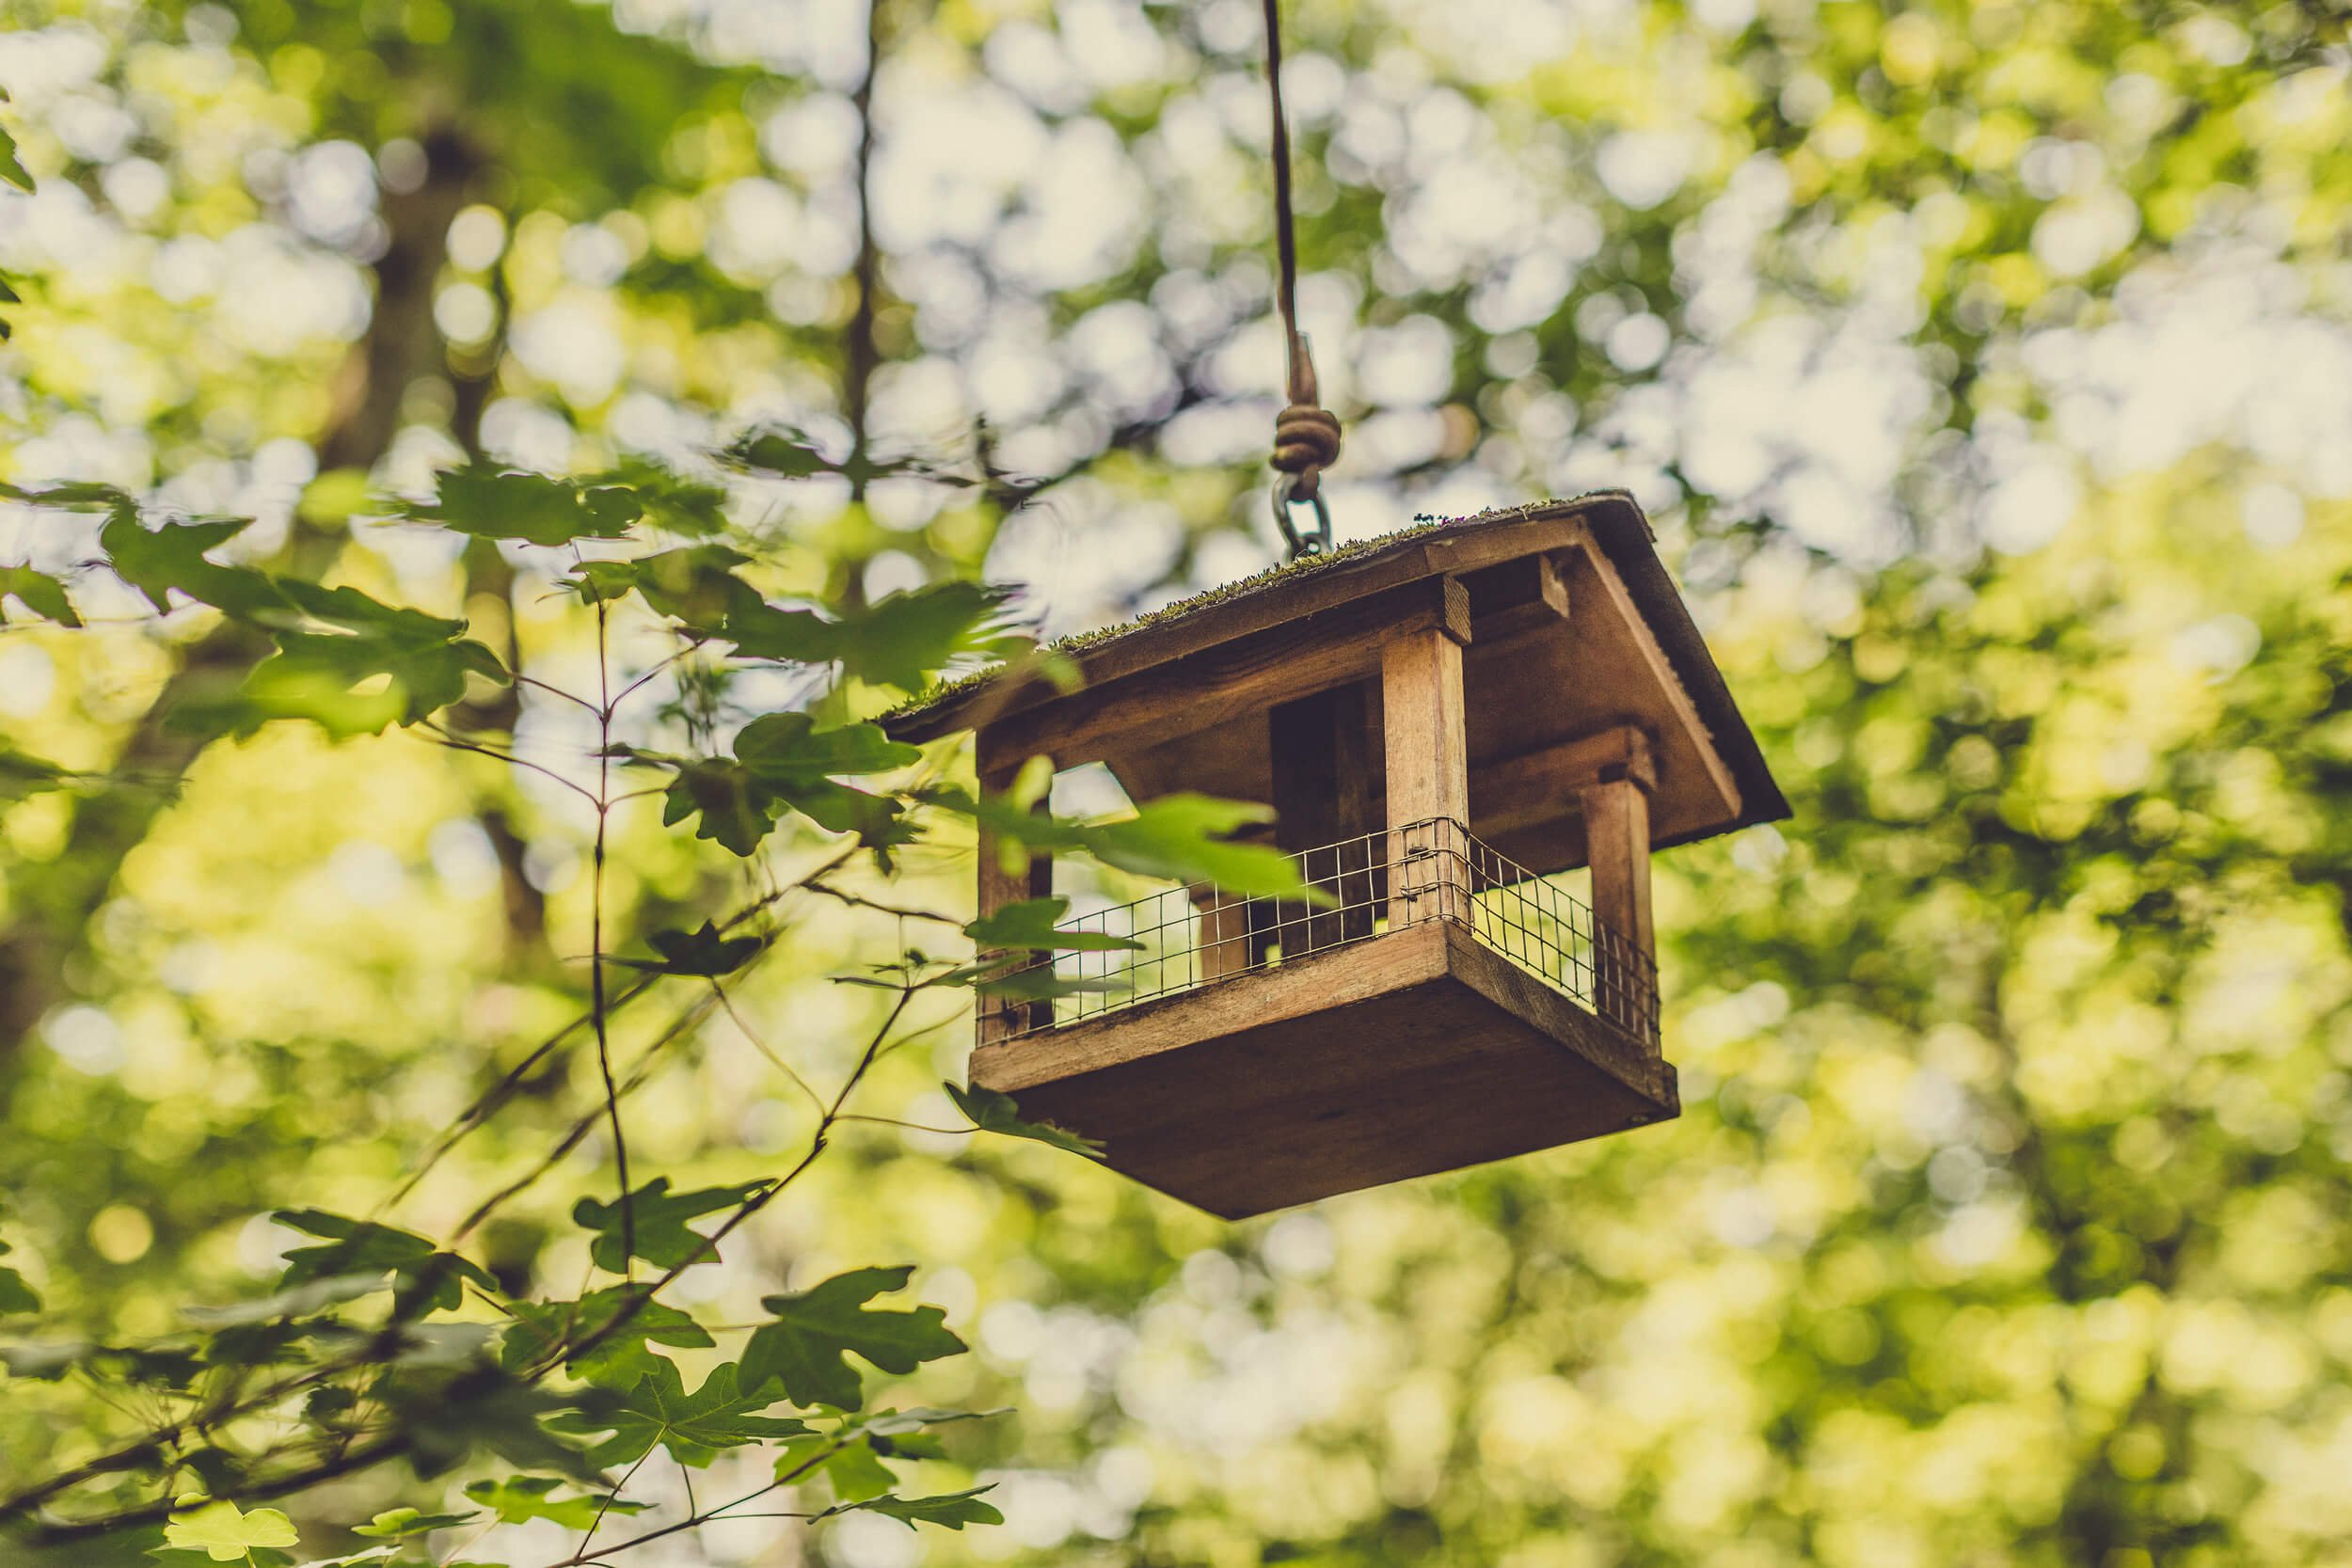 Escape to the forest- a look inside Basoa Suites' treehouses by MuruStudios advertising photographers in Madrid Barcelona Pamplona Spain 34.jpg